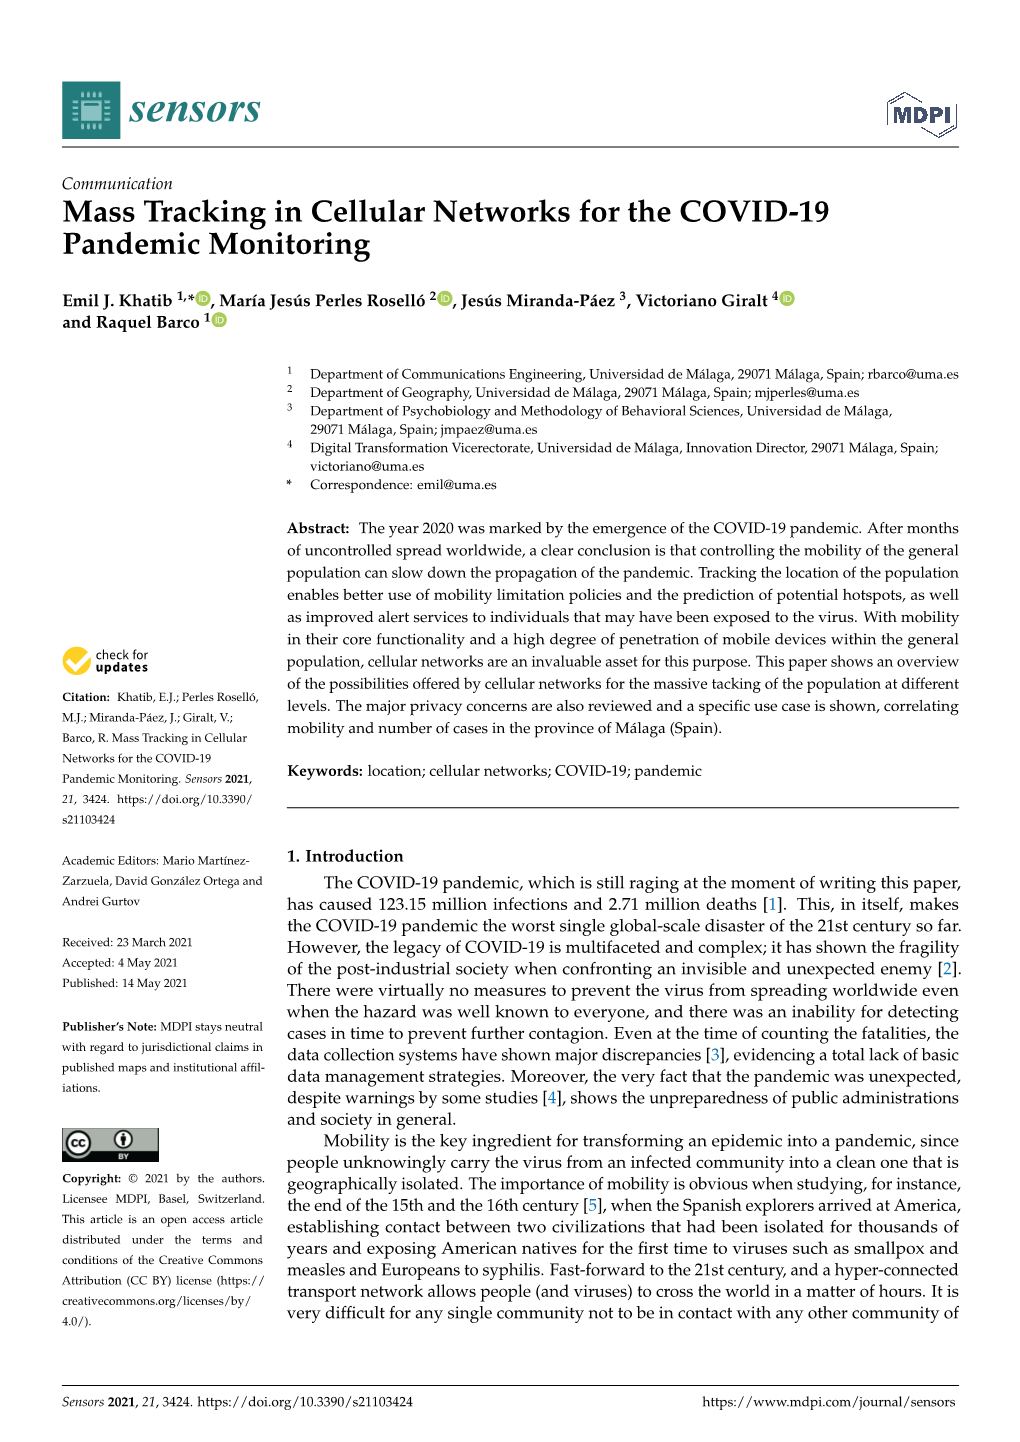 Mass Tracking in Cellular Networks for the COVID-19 Pandemic Monitoring